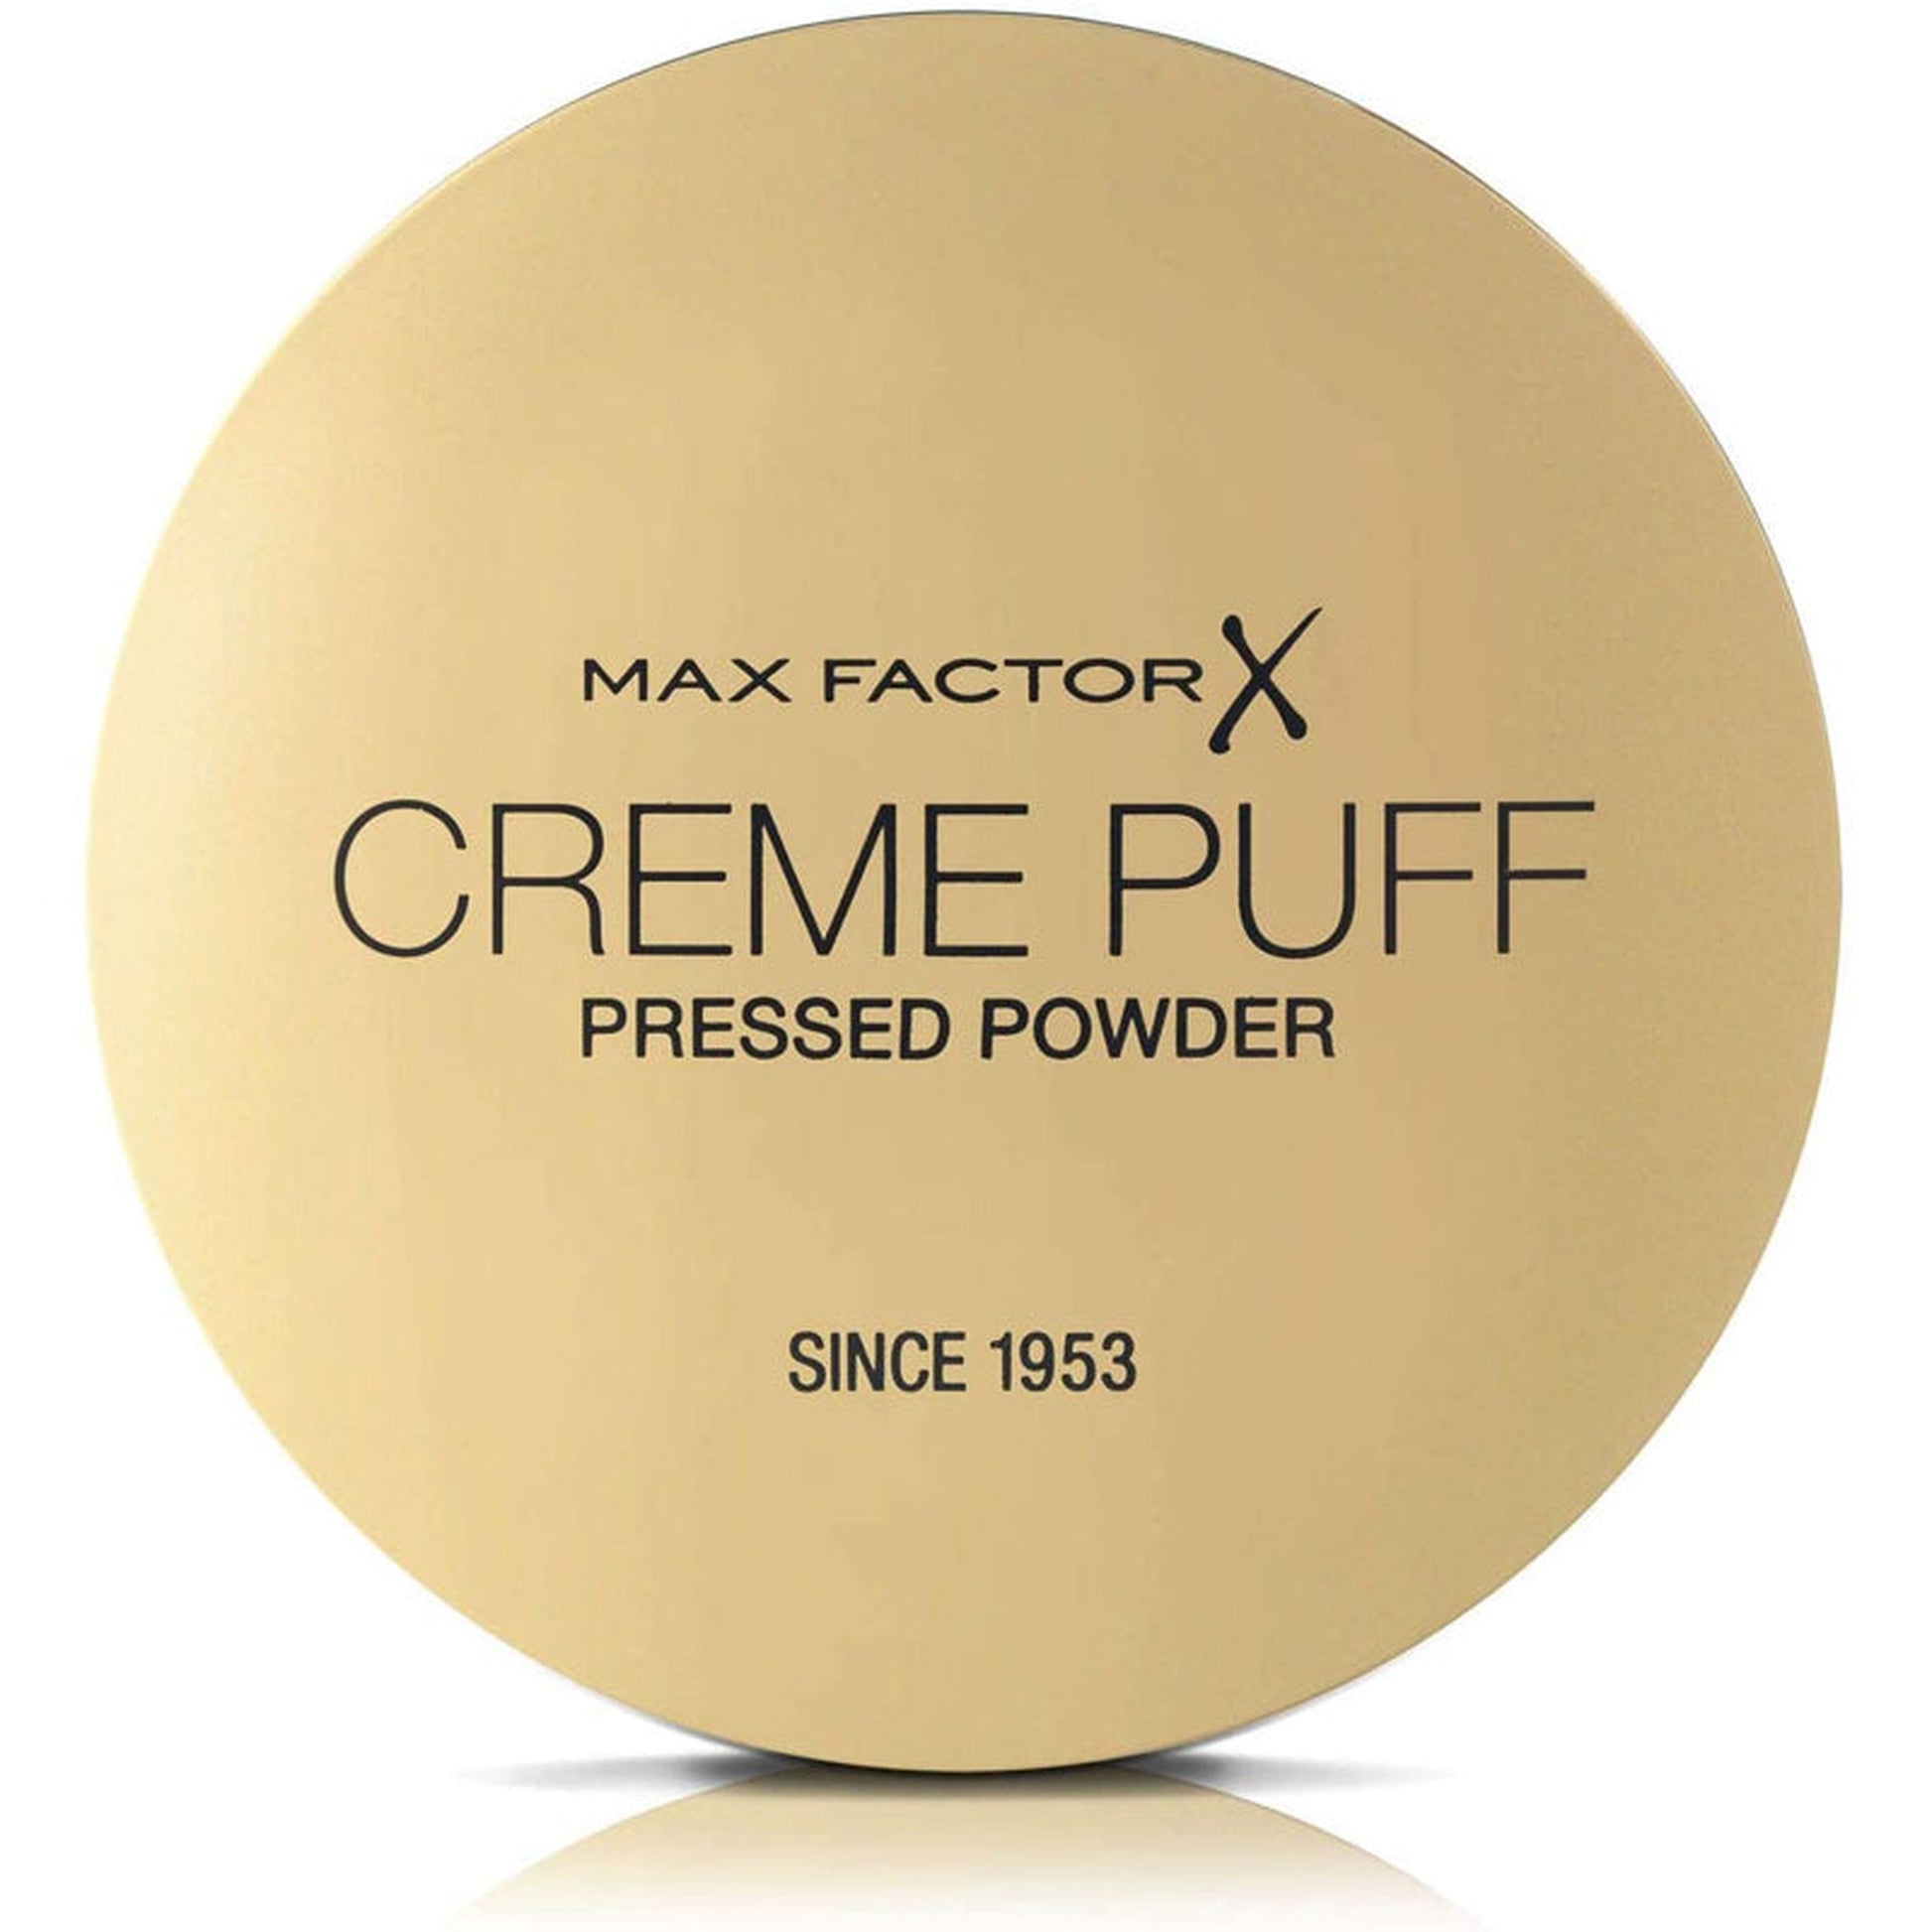 Max Factor Creme Puff Pressed Powder Compact 14g - 81 Truly Fair-Max Factor-BeautyNmakeup.co.uk